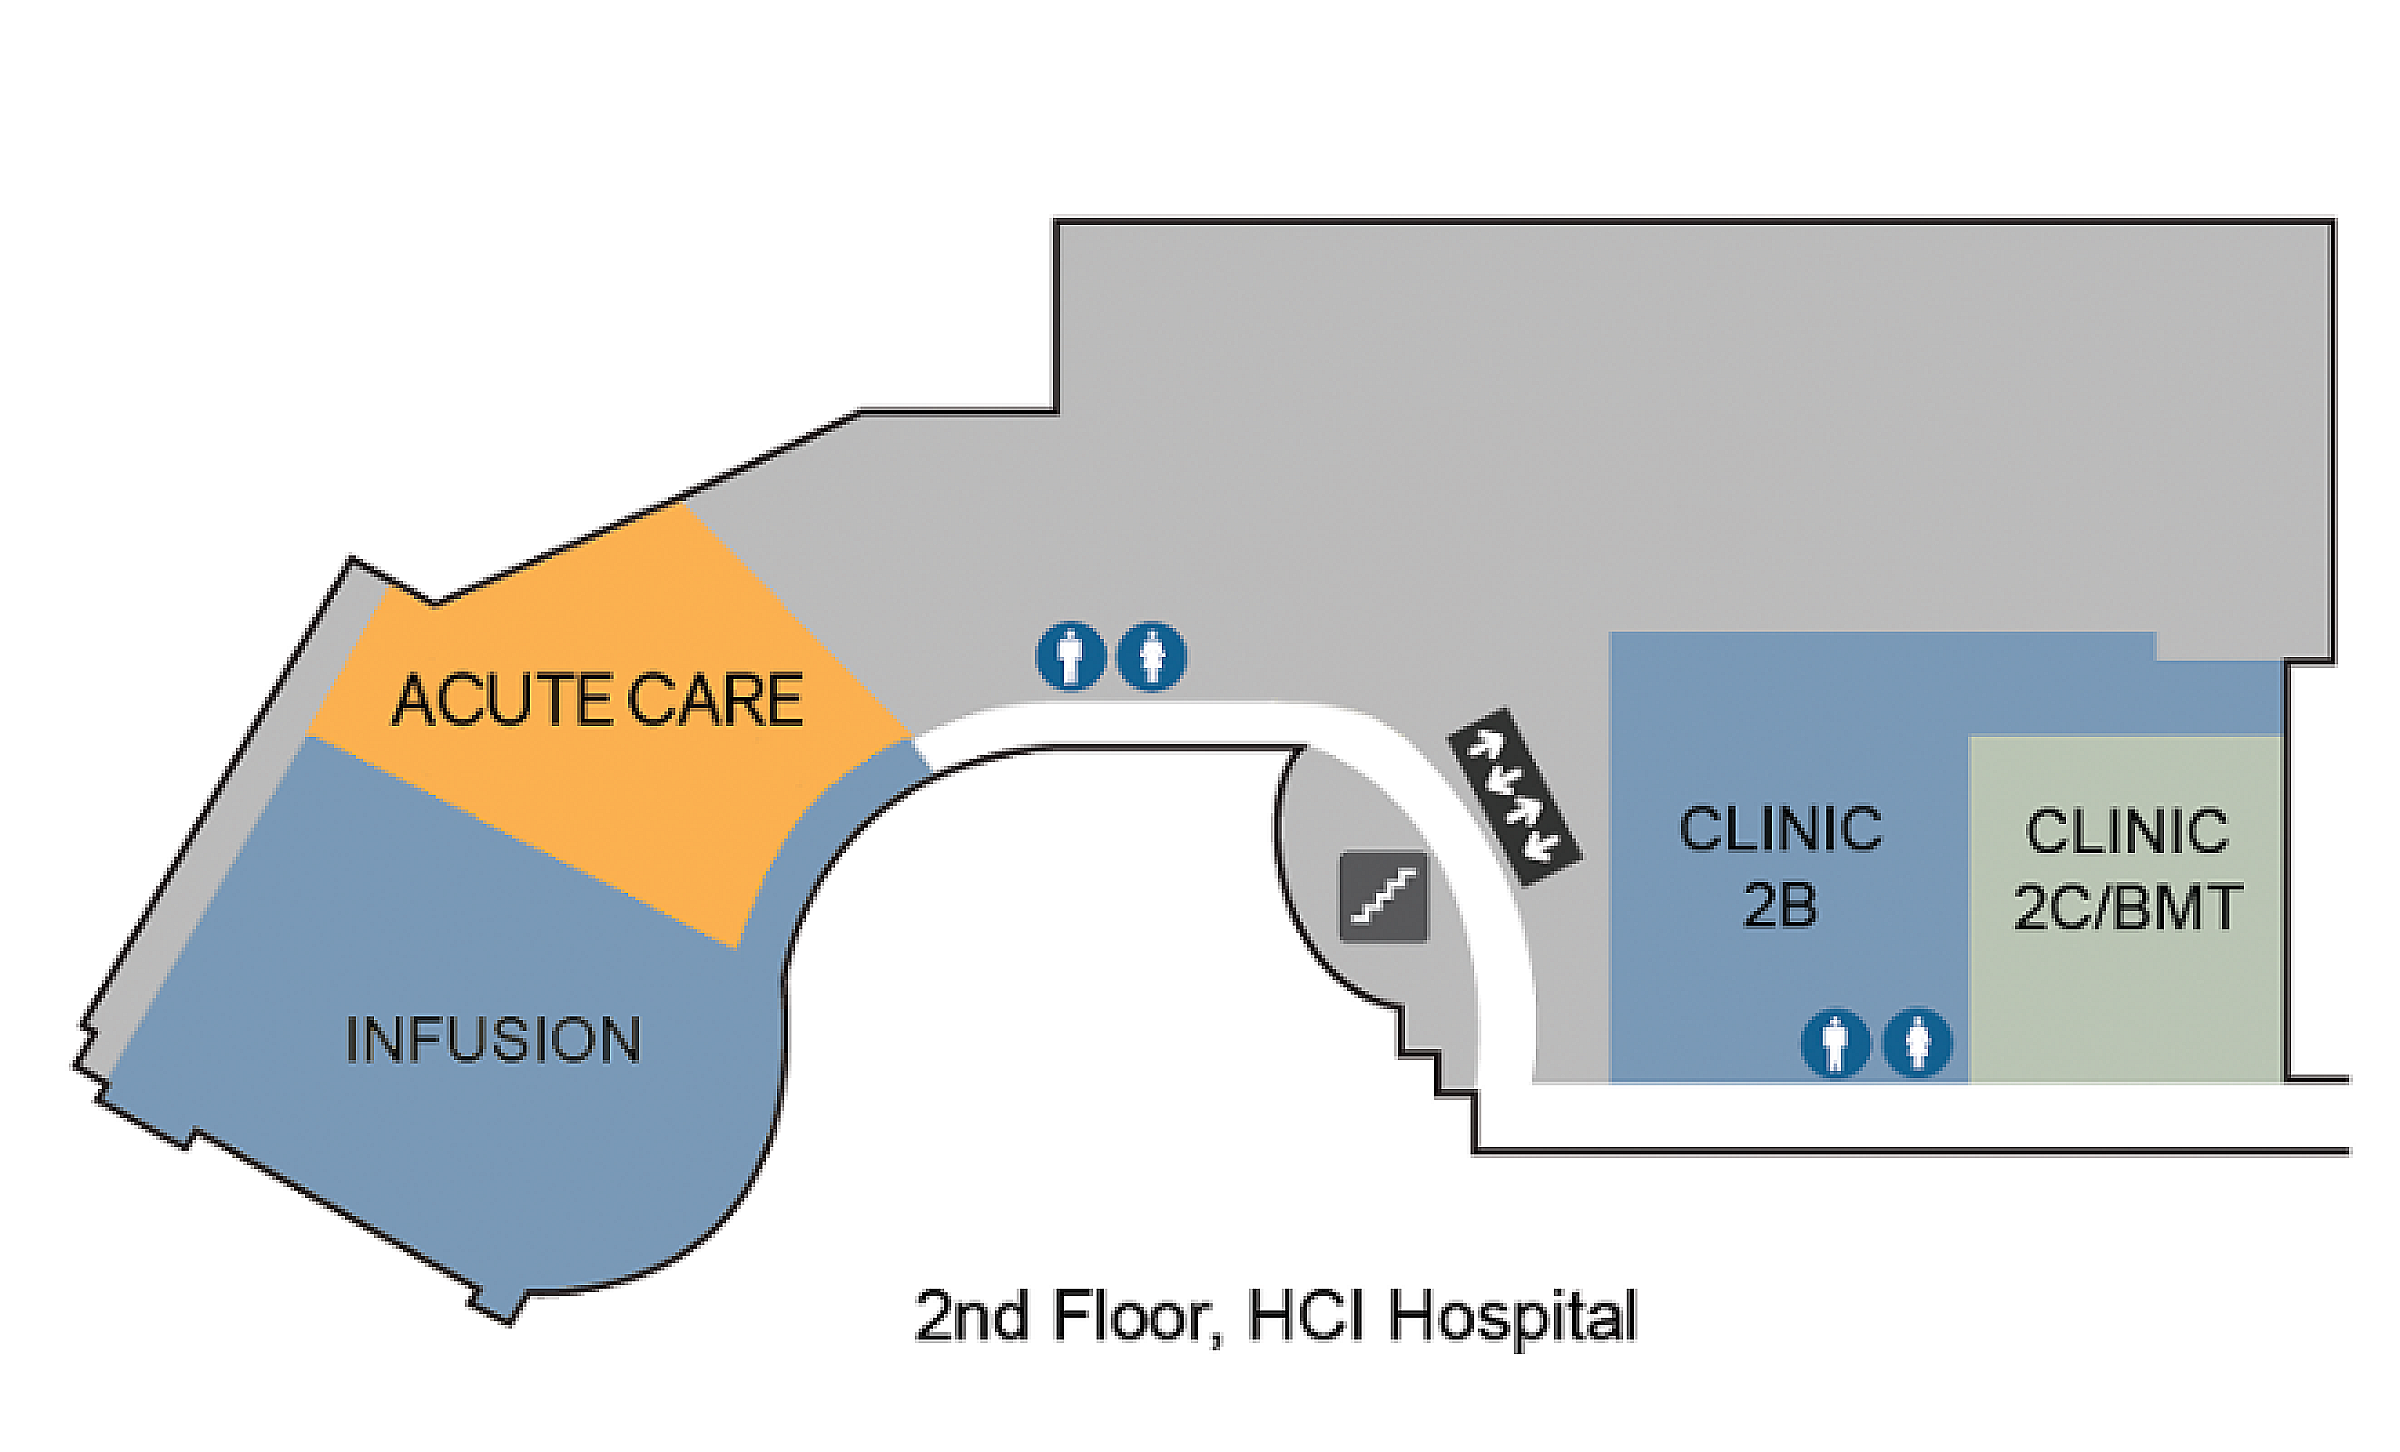 Map of Huntsman Cancer Institute hospital, 2nd floor; acute care is next to infusion